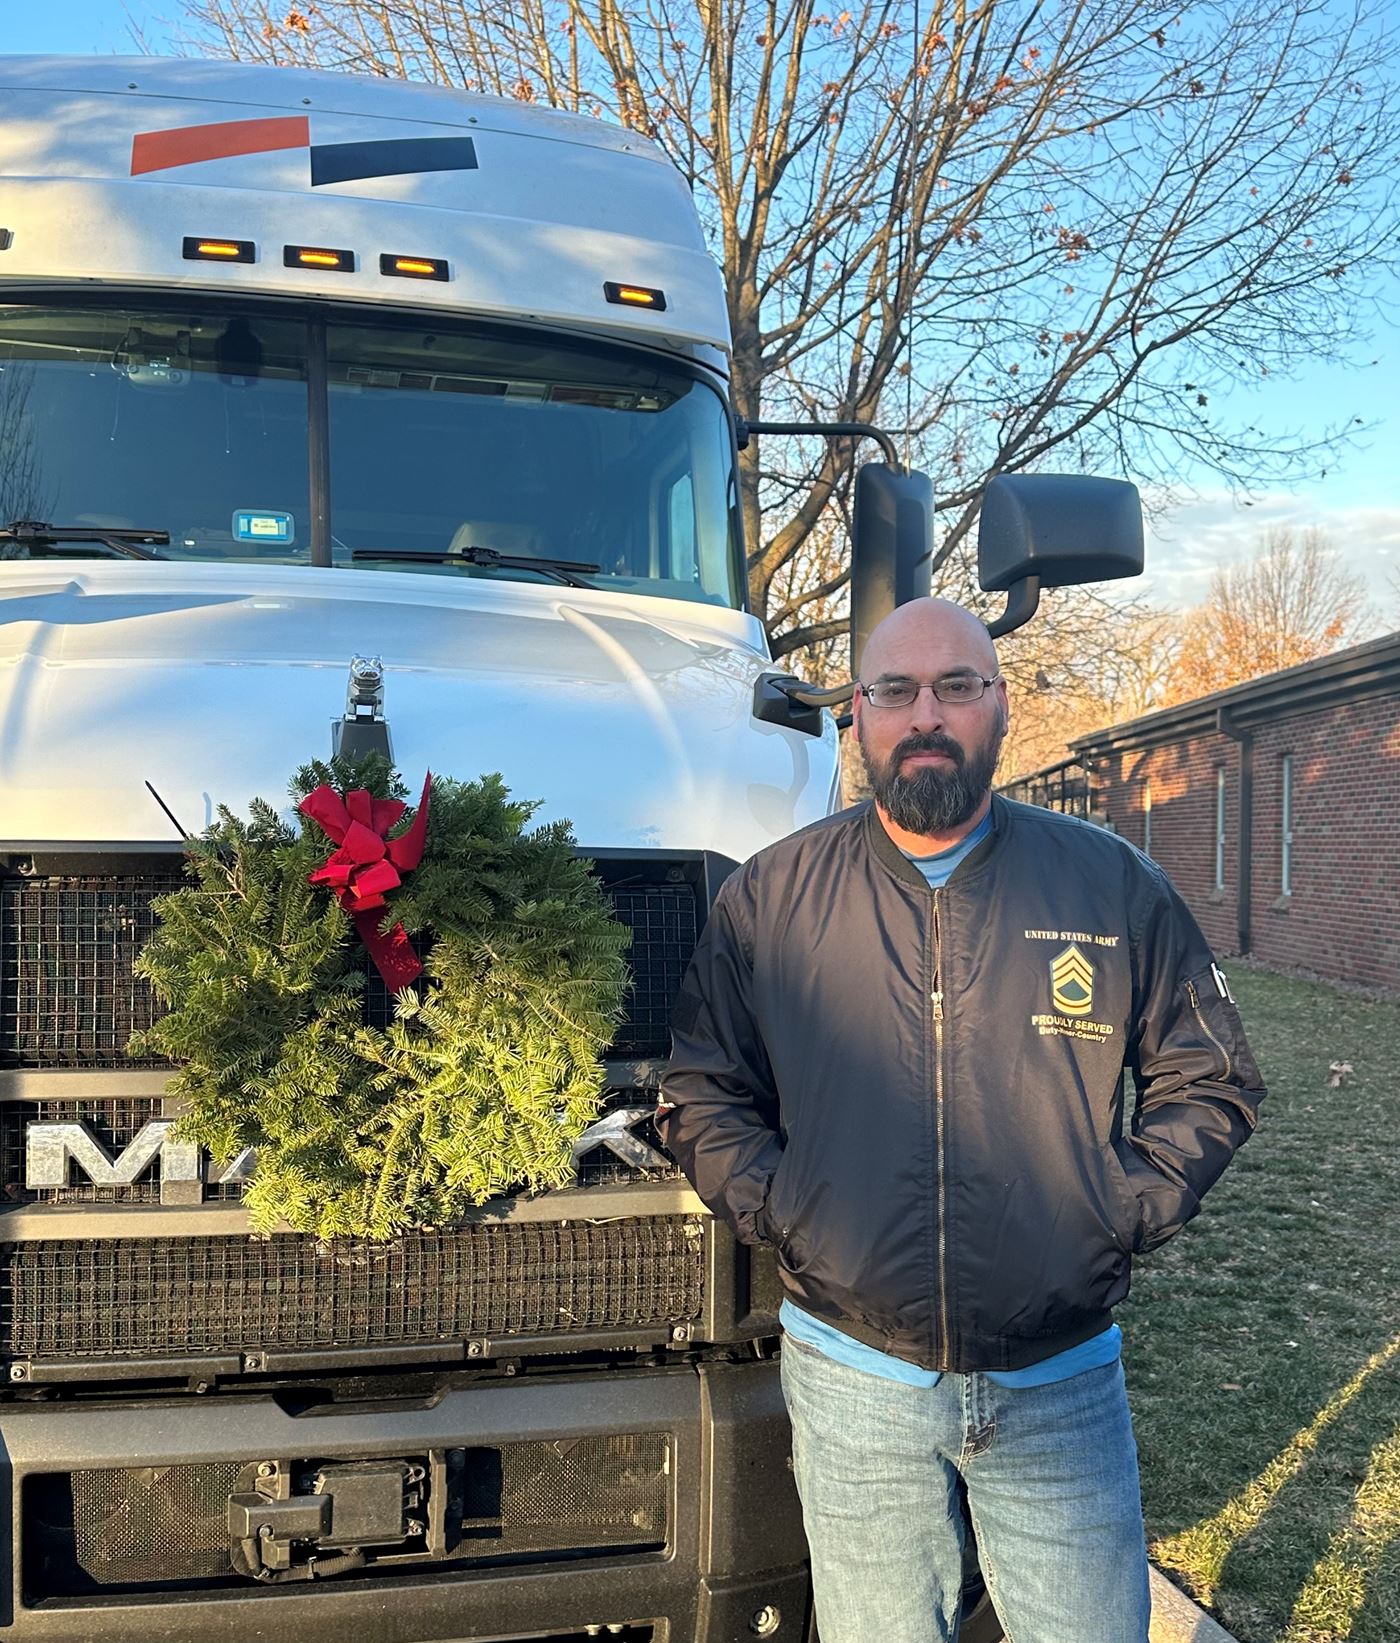 Michael, a veteran and driver for Day &amp; Ross USA, Inc. delivered our 3,600 wreaths to the RI Cemetery.&nbsp; Thank you to both Michael and Day &amp; Ross for volunteering to deliver our wreaths from the State of Maine.&nbsp; THANK YOU!